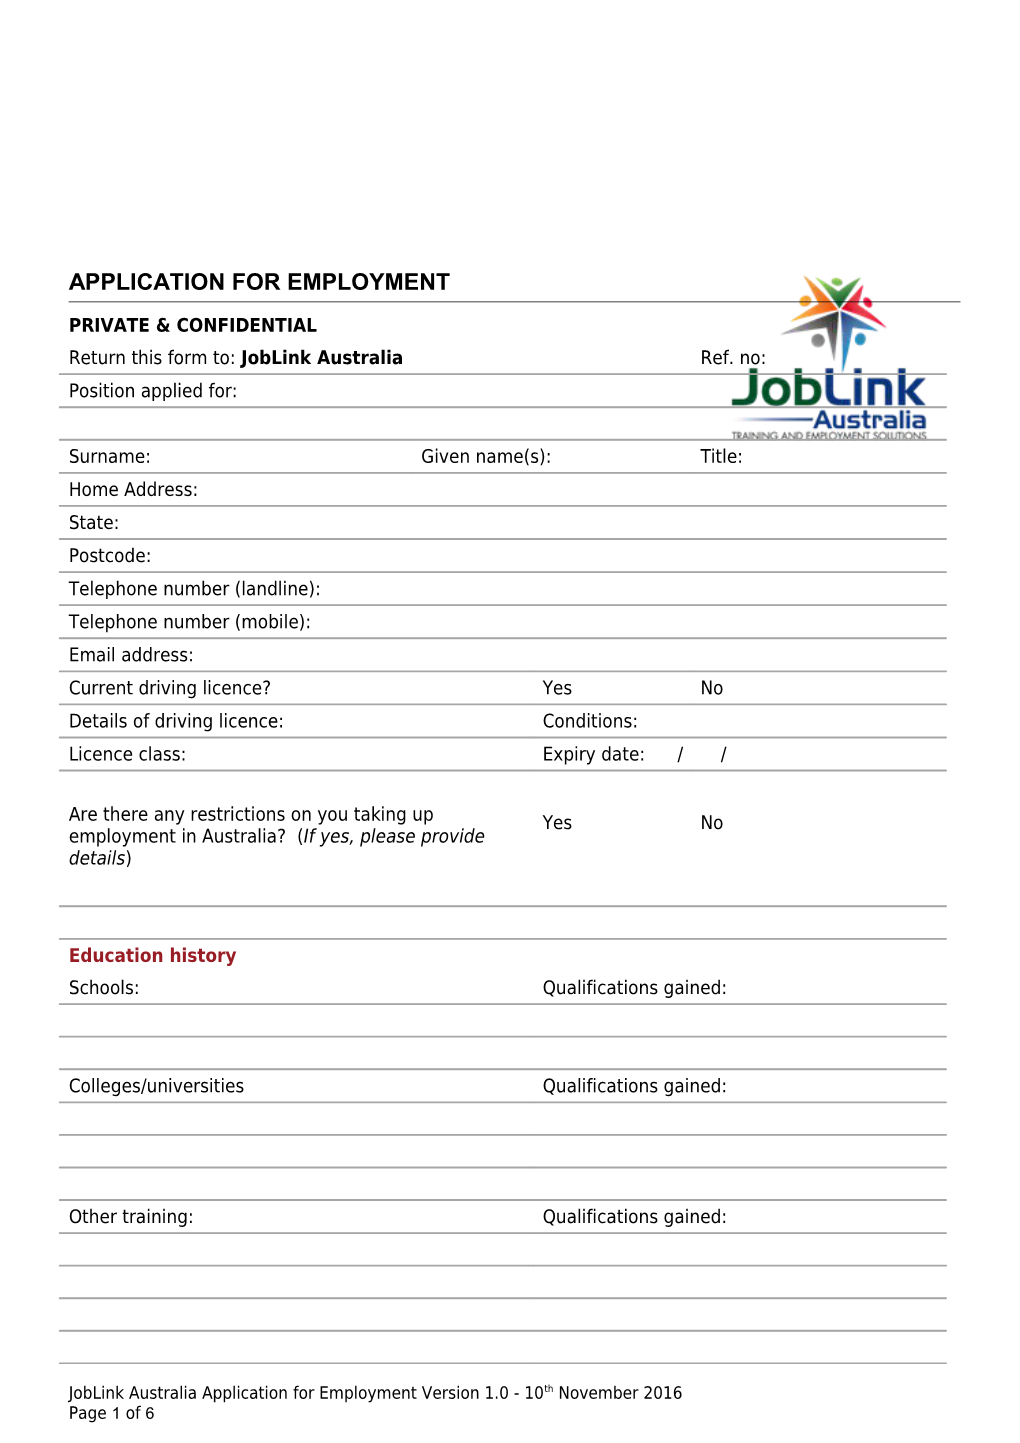 Joblink Australia Application for Employment Version 1.0 -10Th November 2016 Page 1 of 4